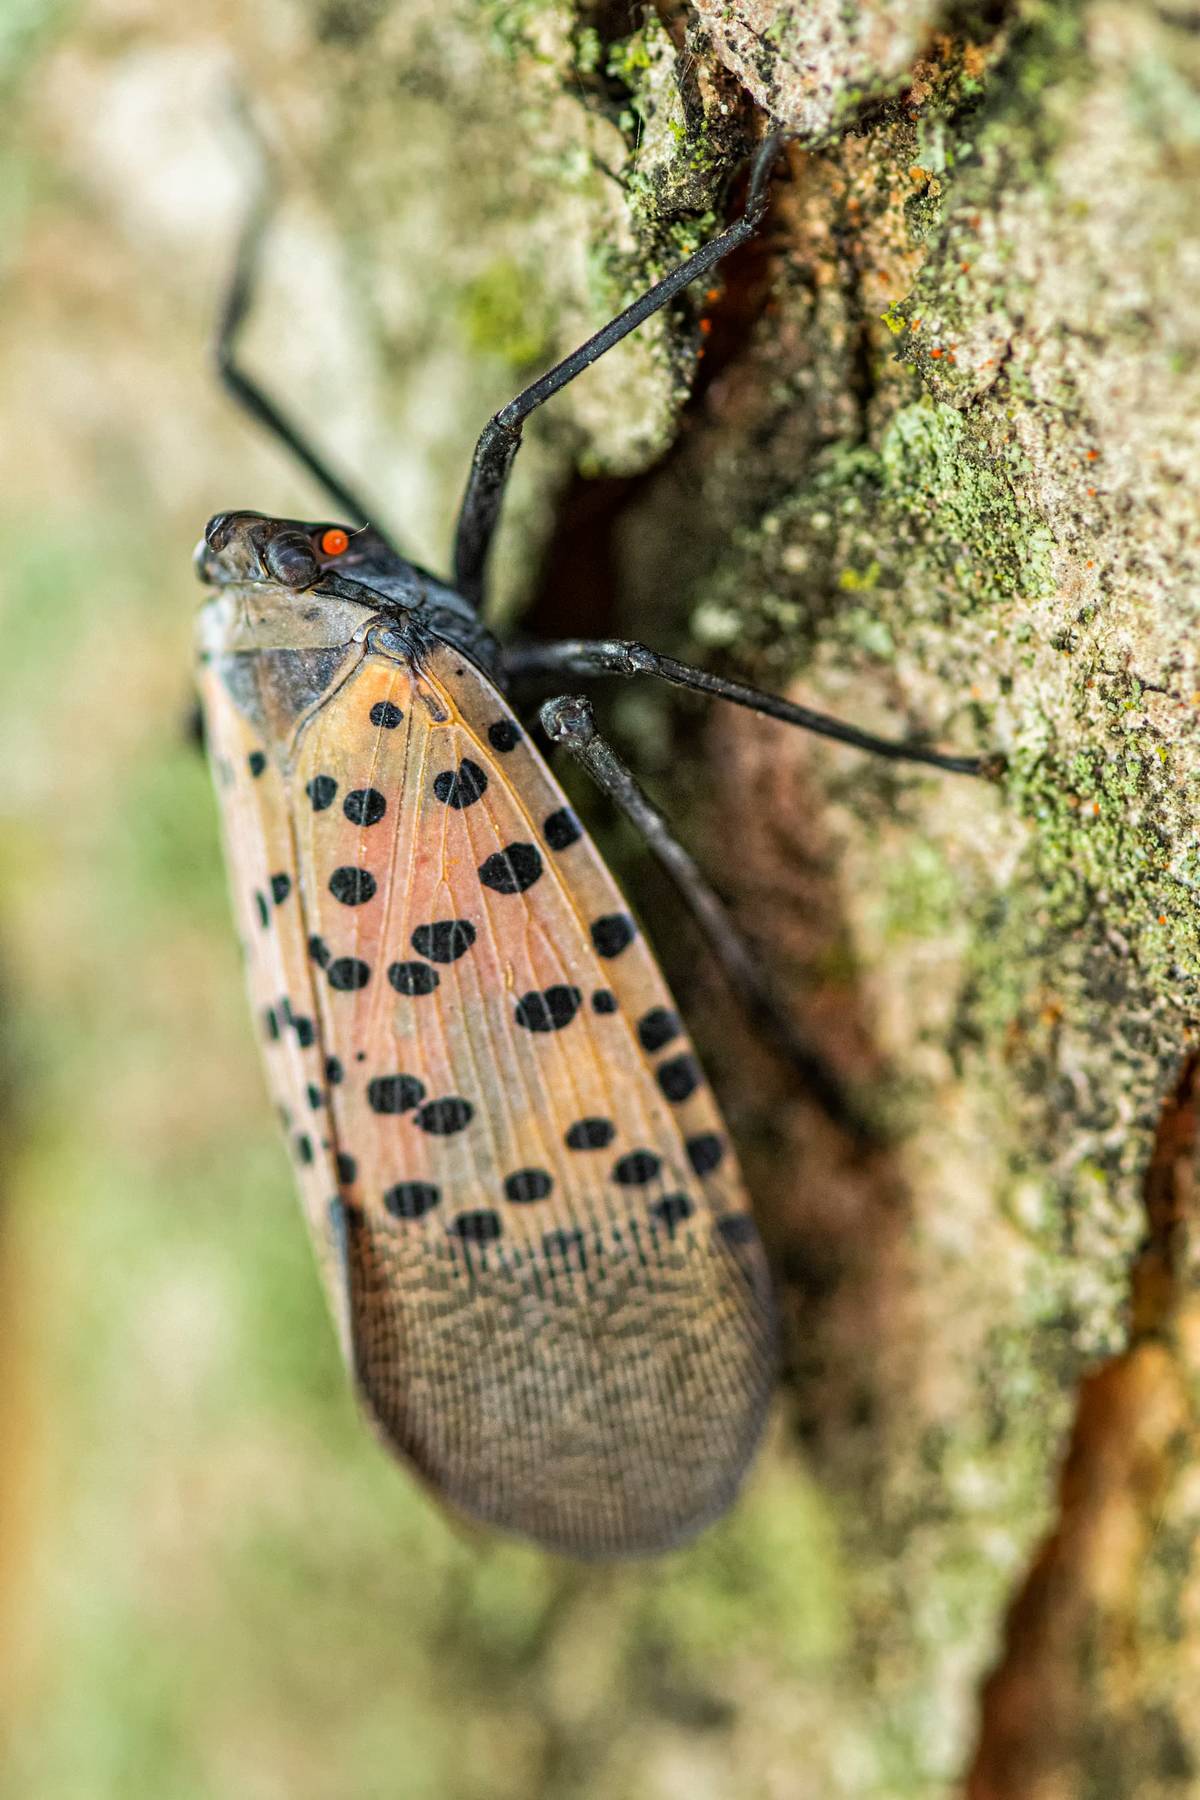 Spotted Lanternfly species